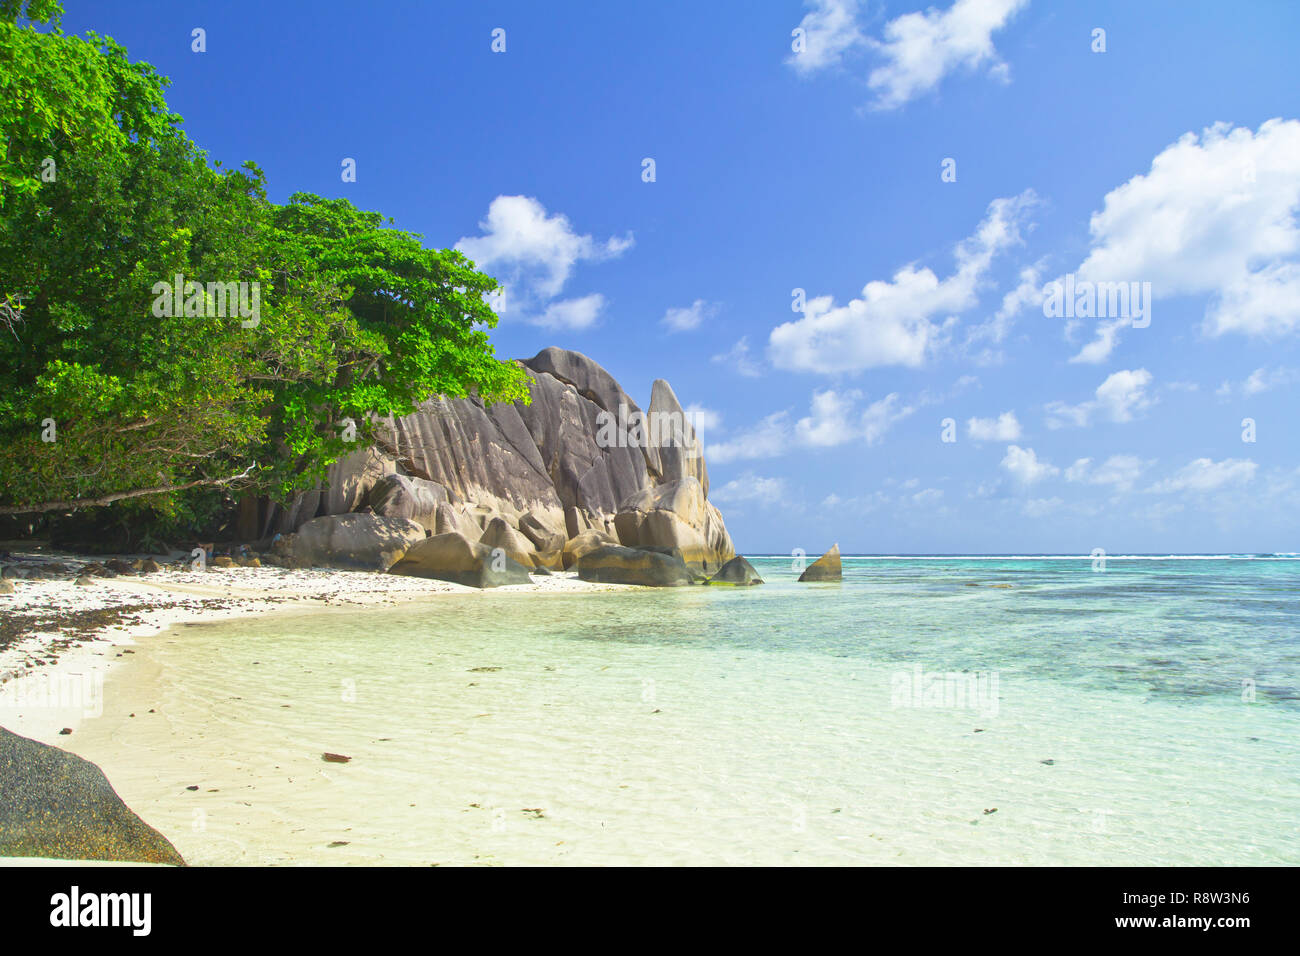 Anse Source d'Argent, La Digue-World-famous beach, and one of the most photographed spots in the whole world thanks to its amazing natural beauty Stock Photo